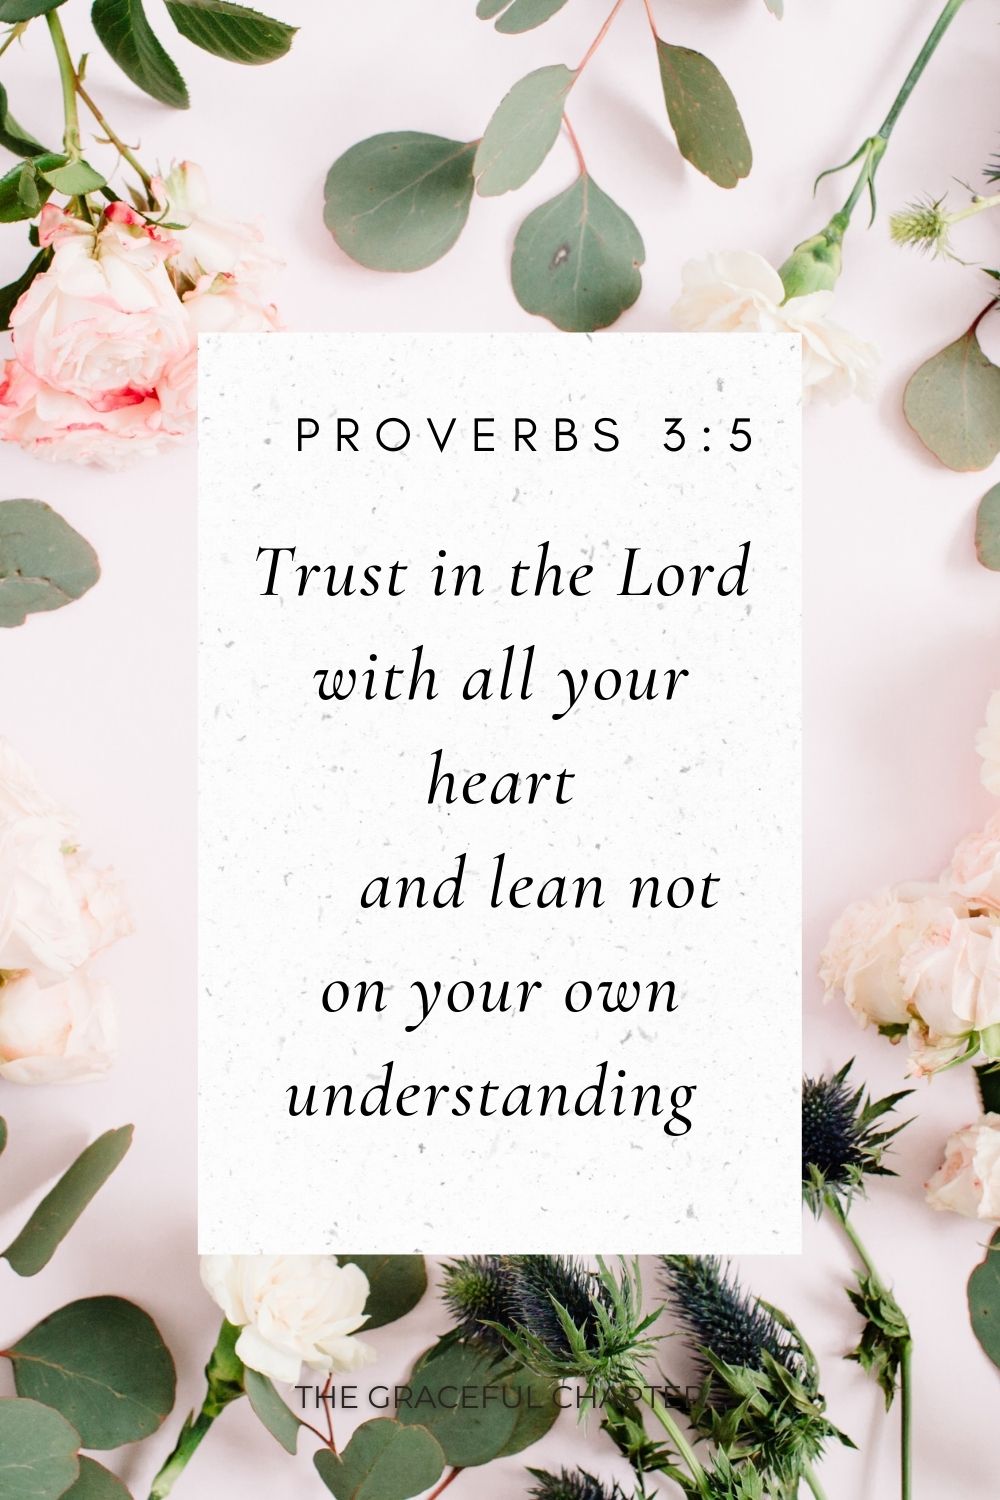 Trust in the Lord with all your heart     and lean not on your own understanding  Proverbs 3:5